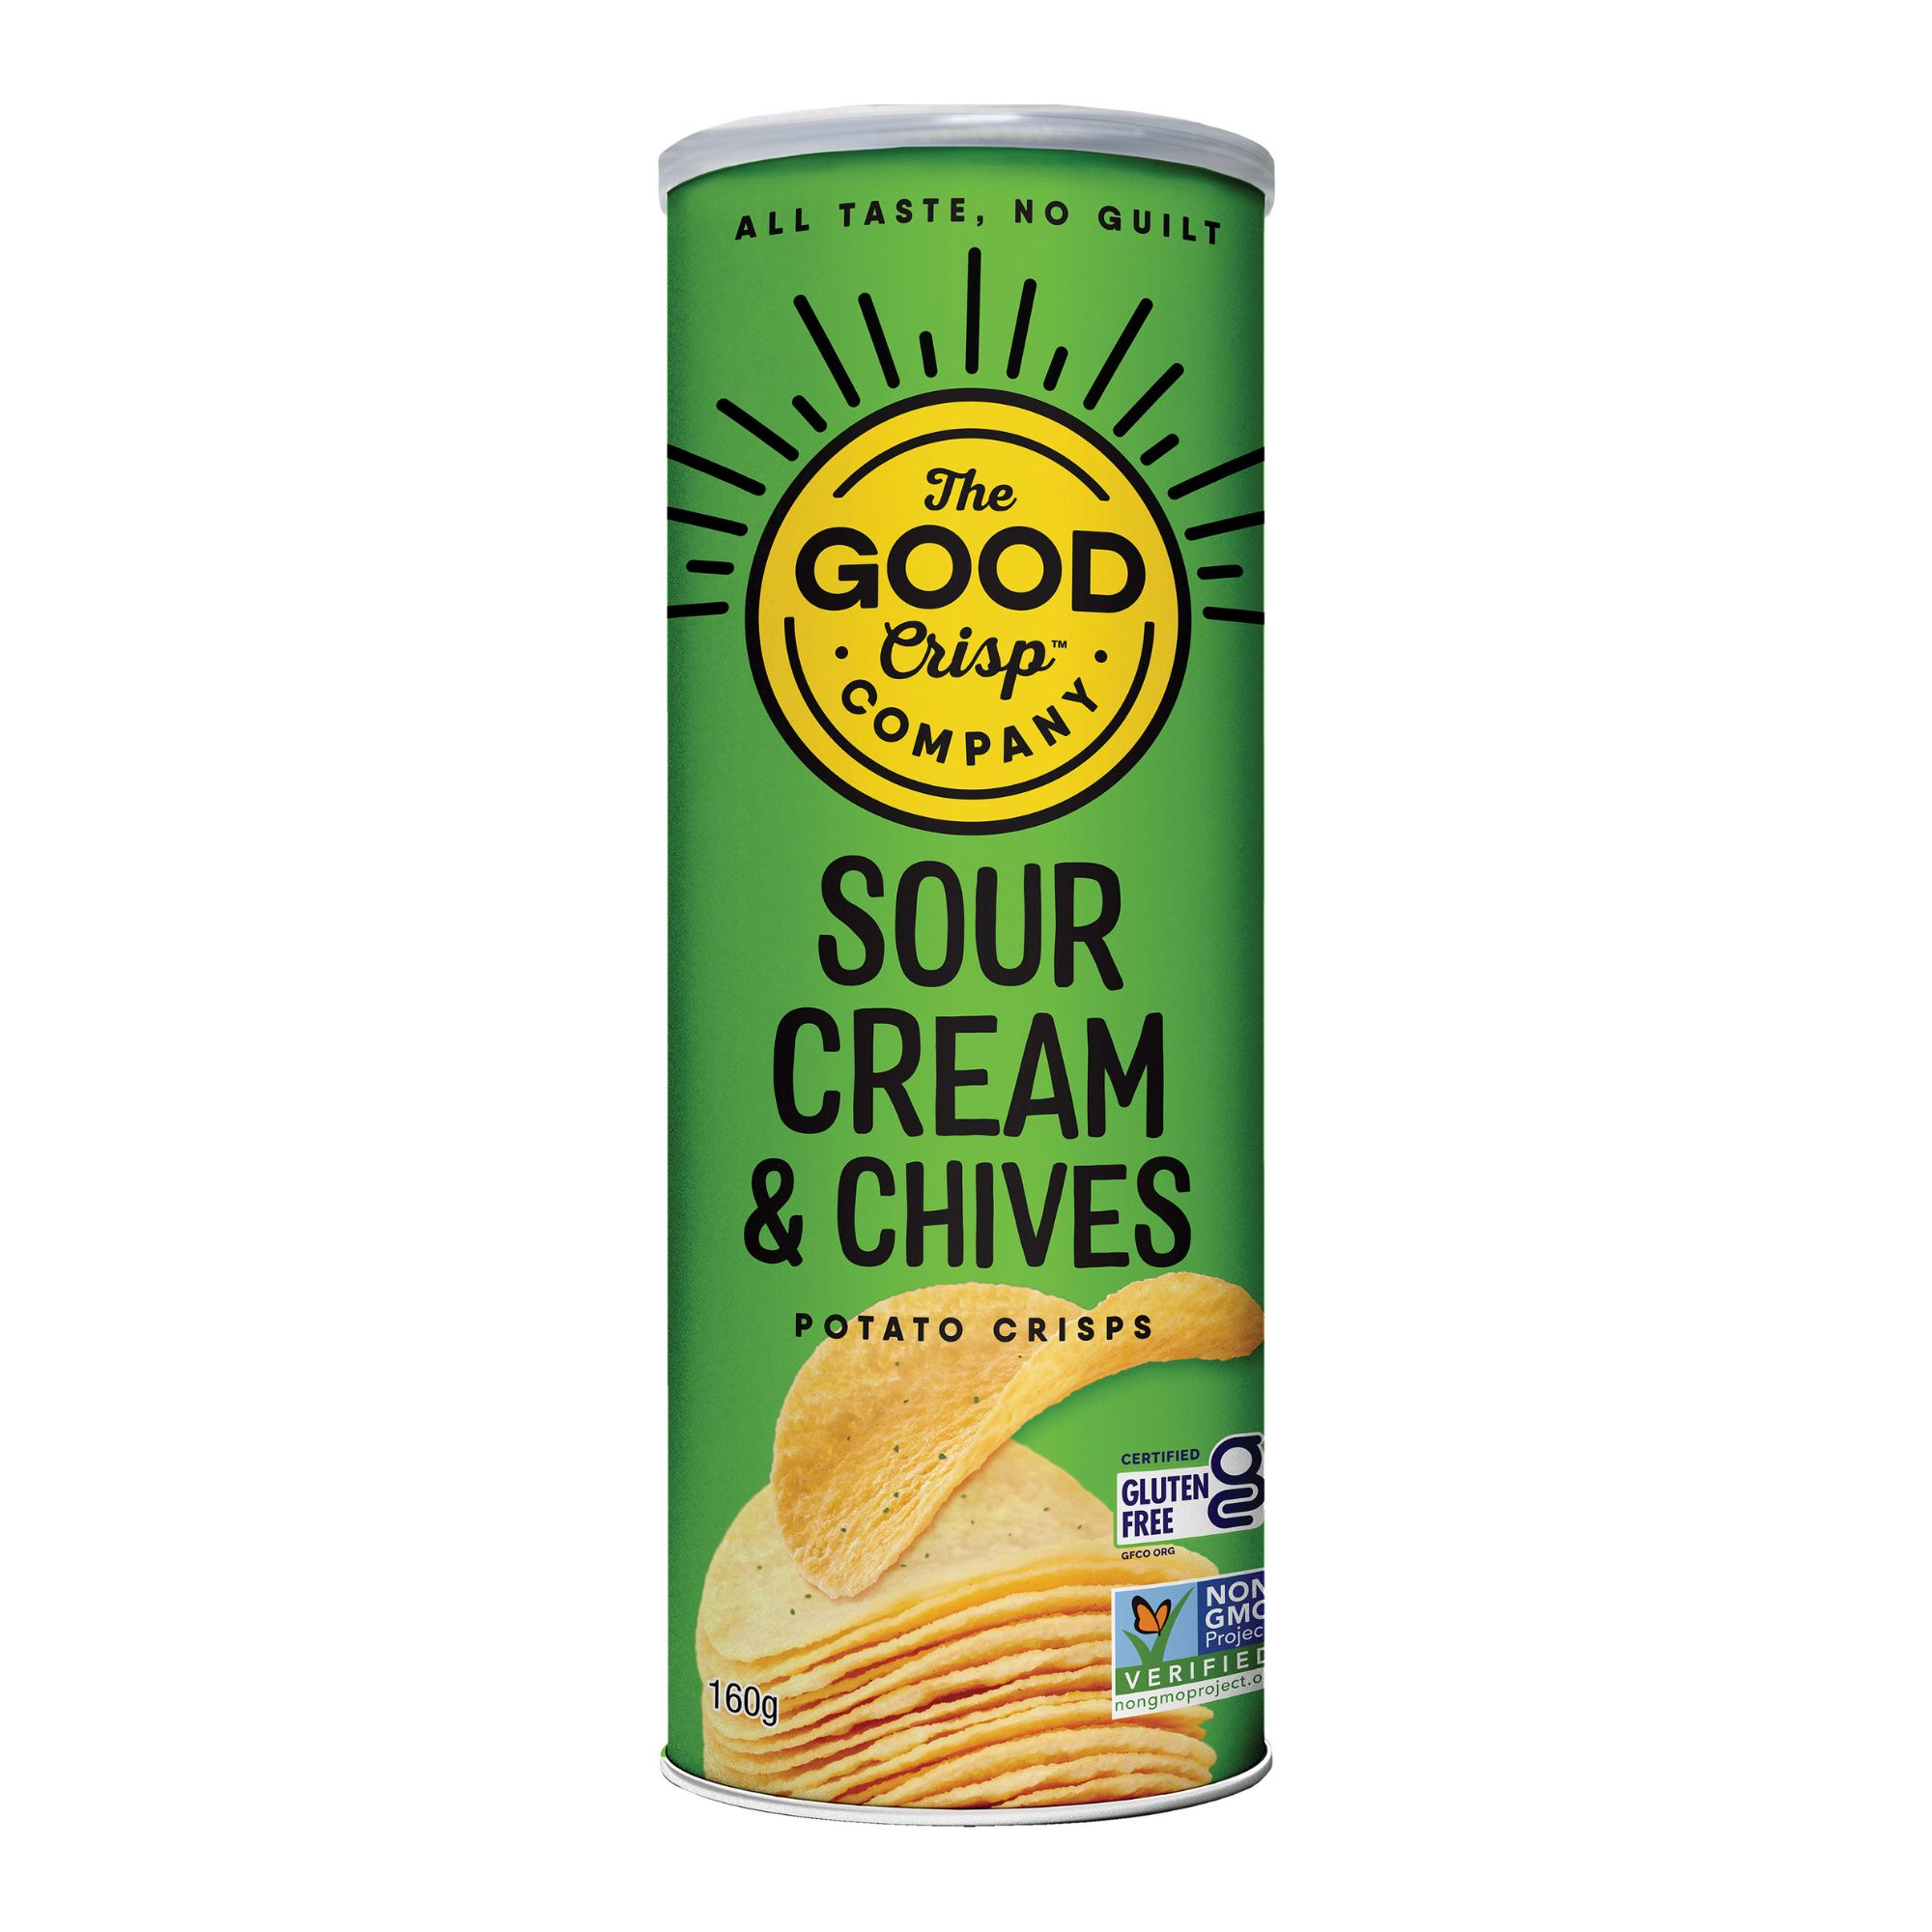 The Good Company Crisps Sour Cream & Chives 158g